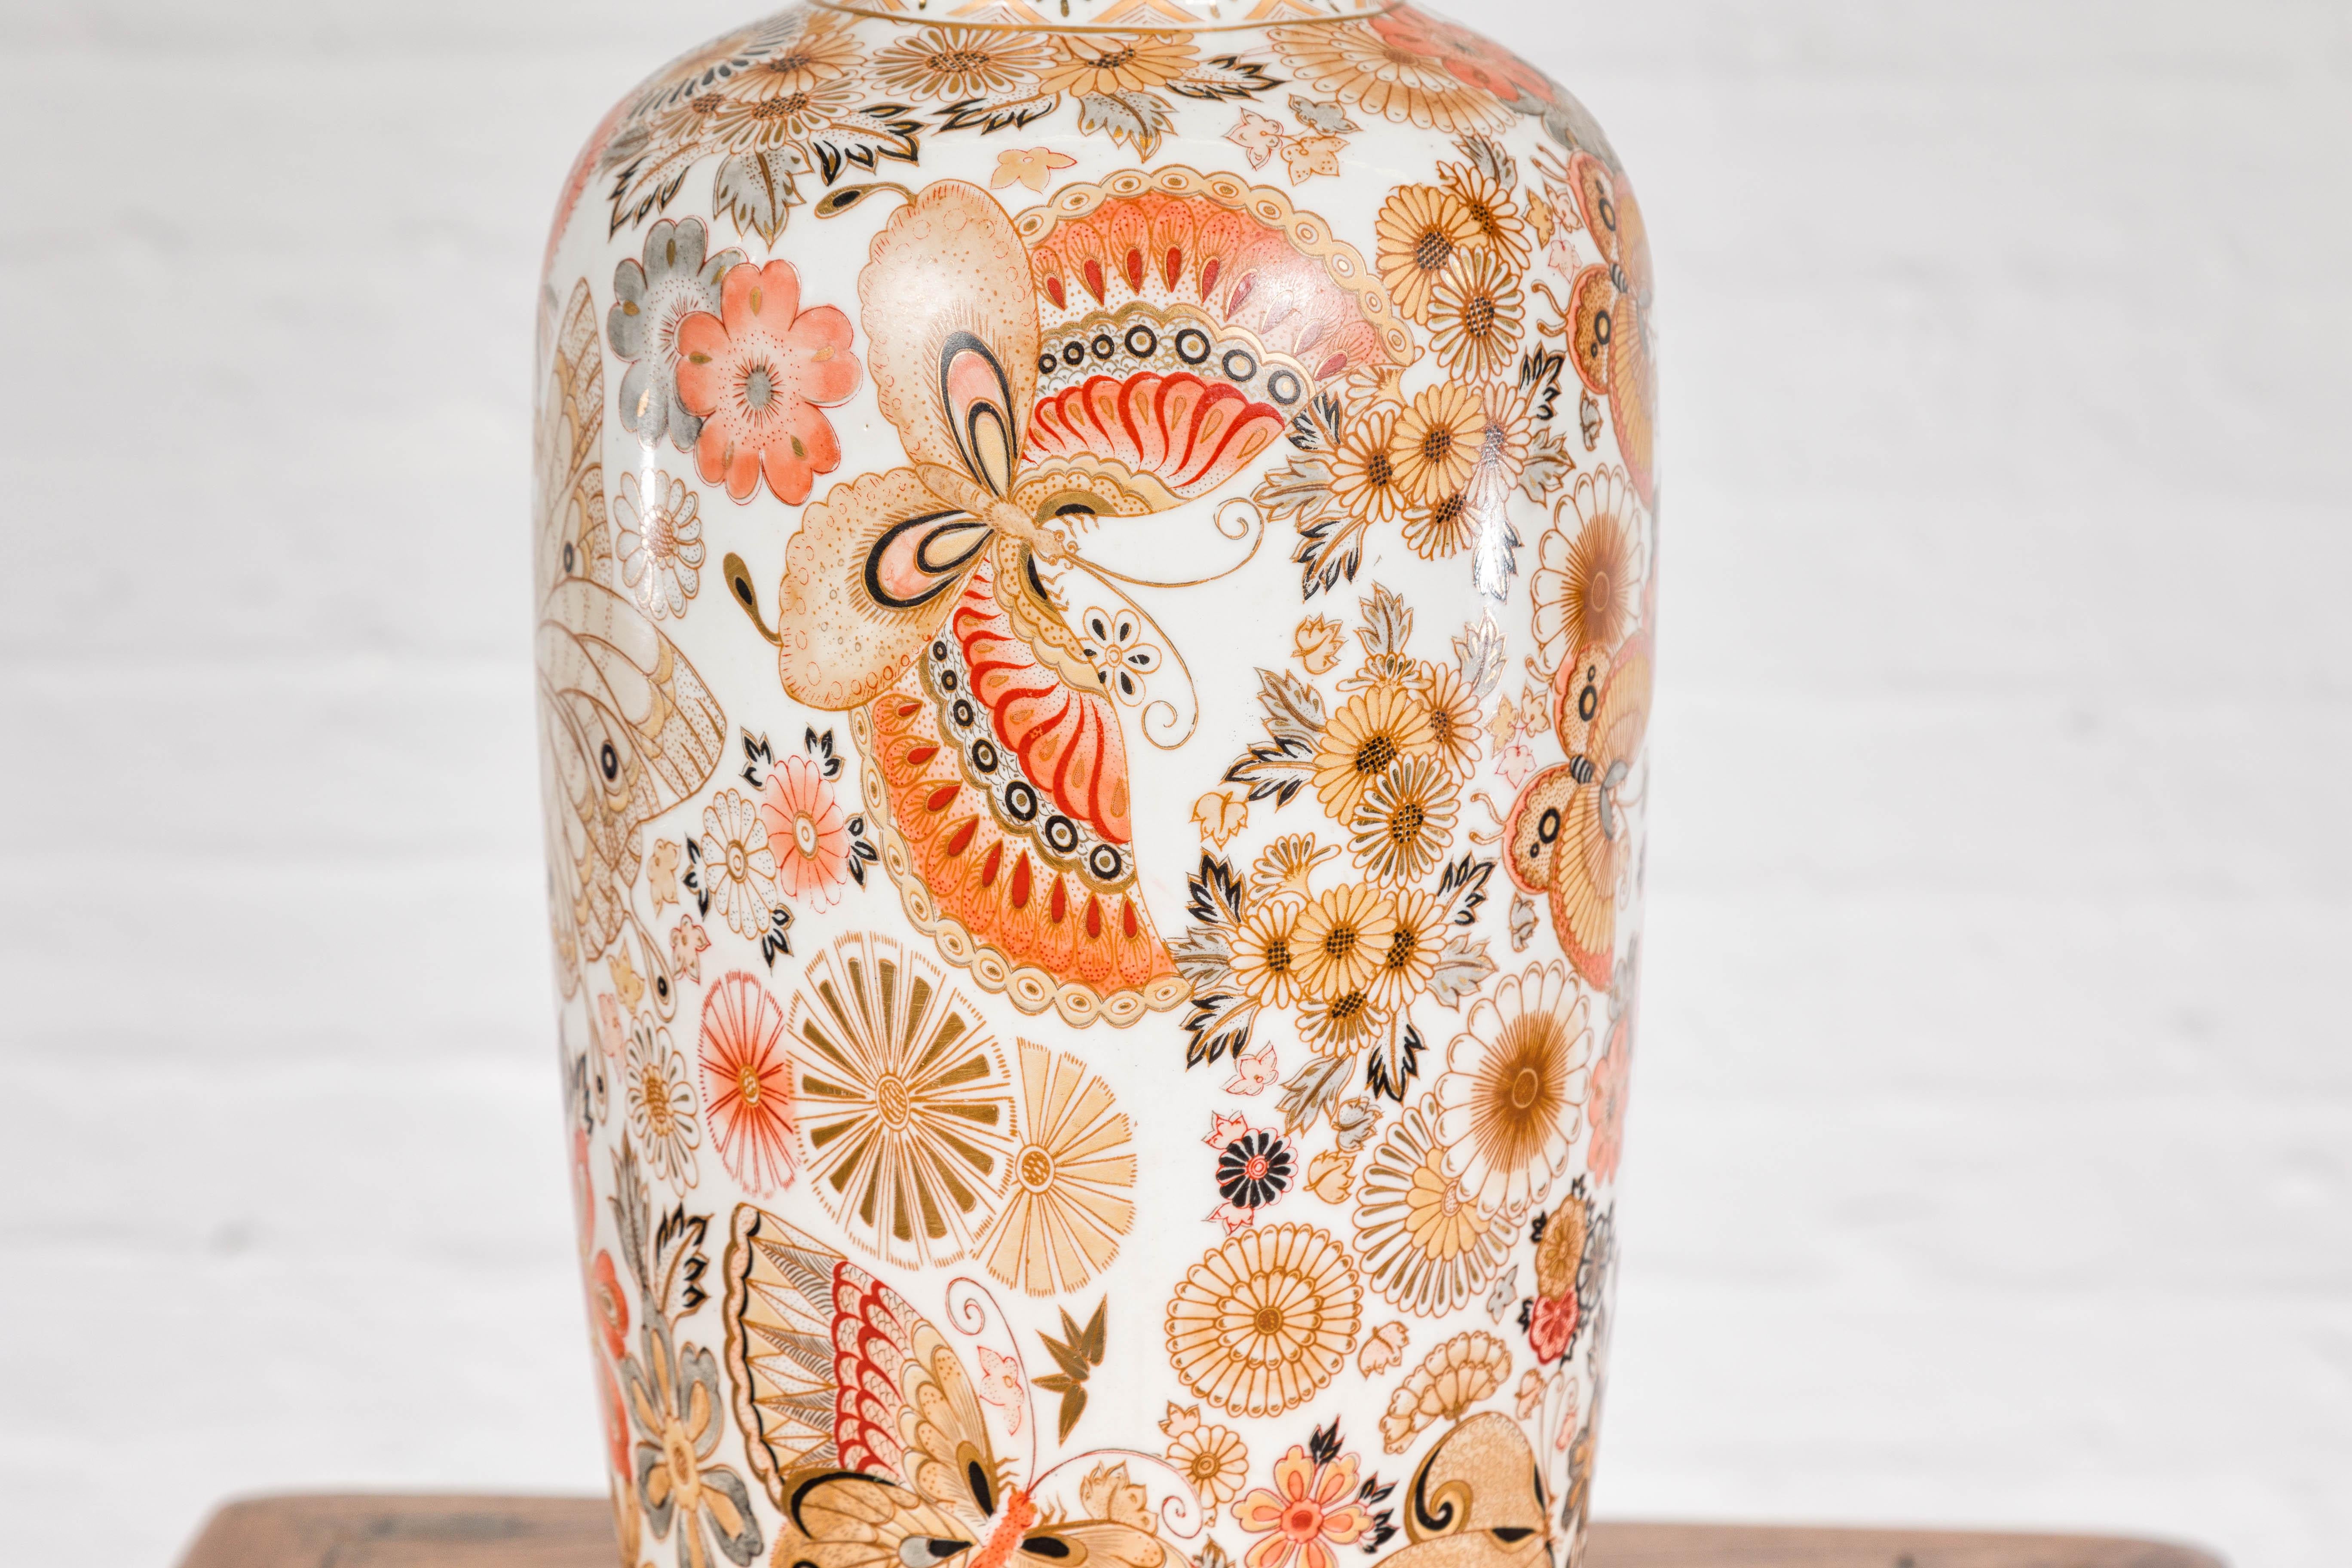 Chinese Vintage Japanese Kutani Style Vase with Flowers and Butterflies For Sale 2